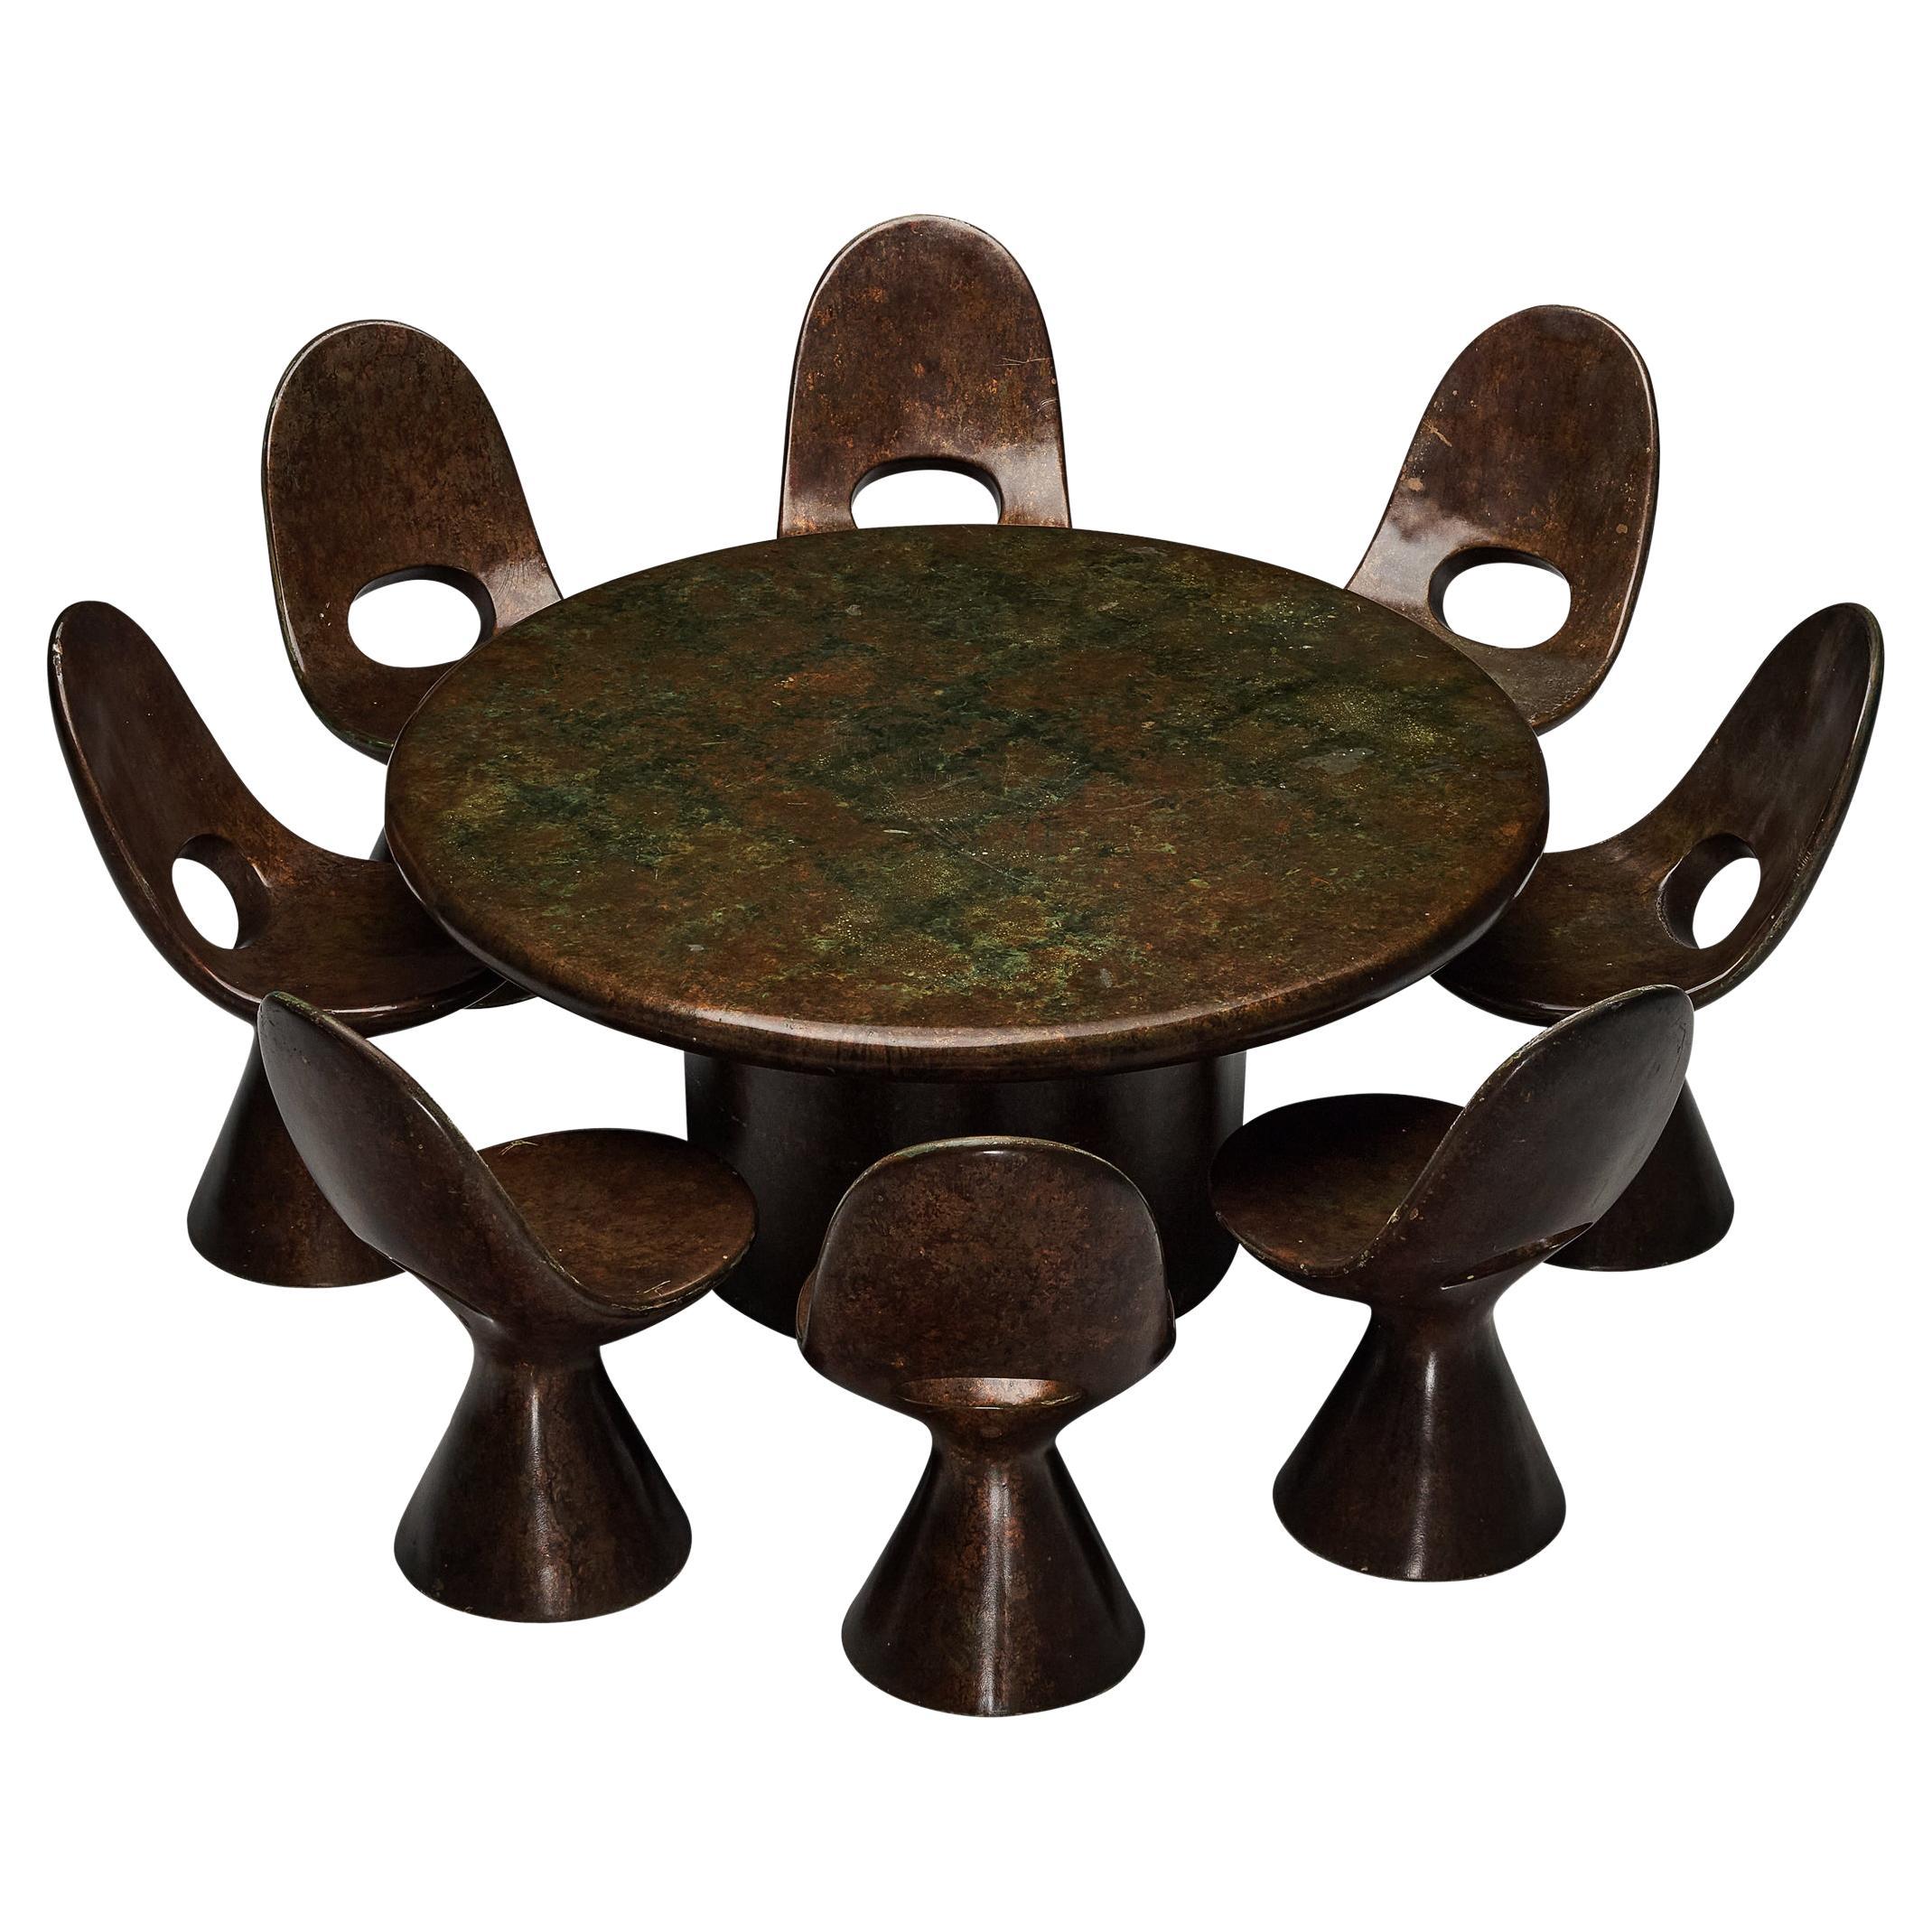 Rare Italian Sculptural Dining Room Set with Iridescent Surface  For Sale